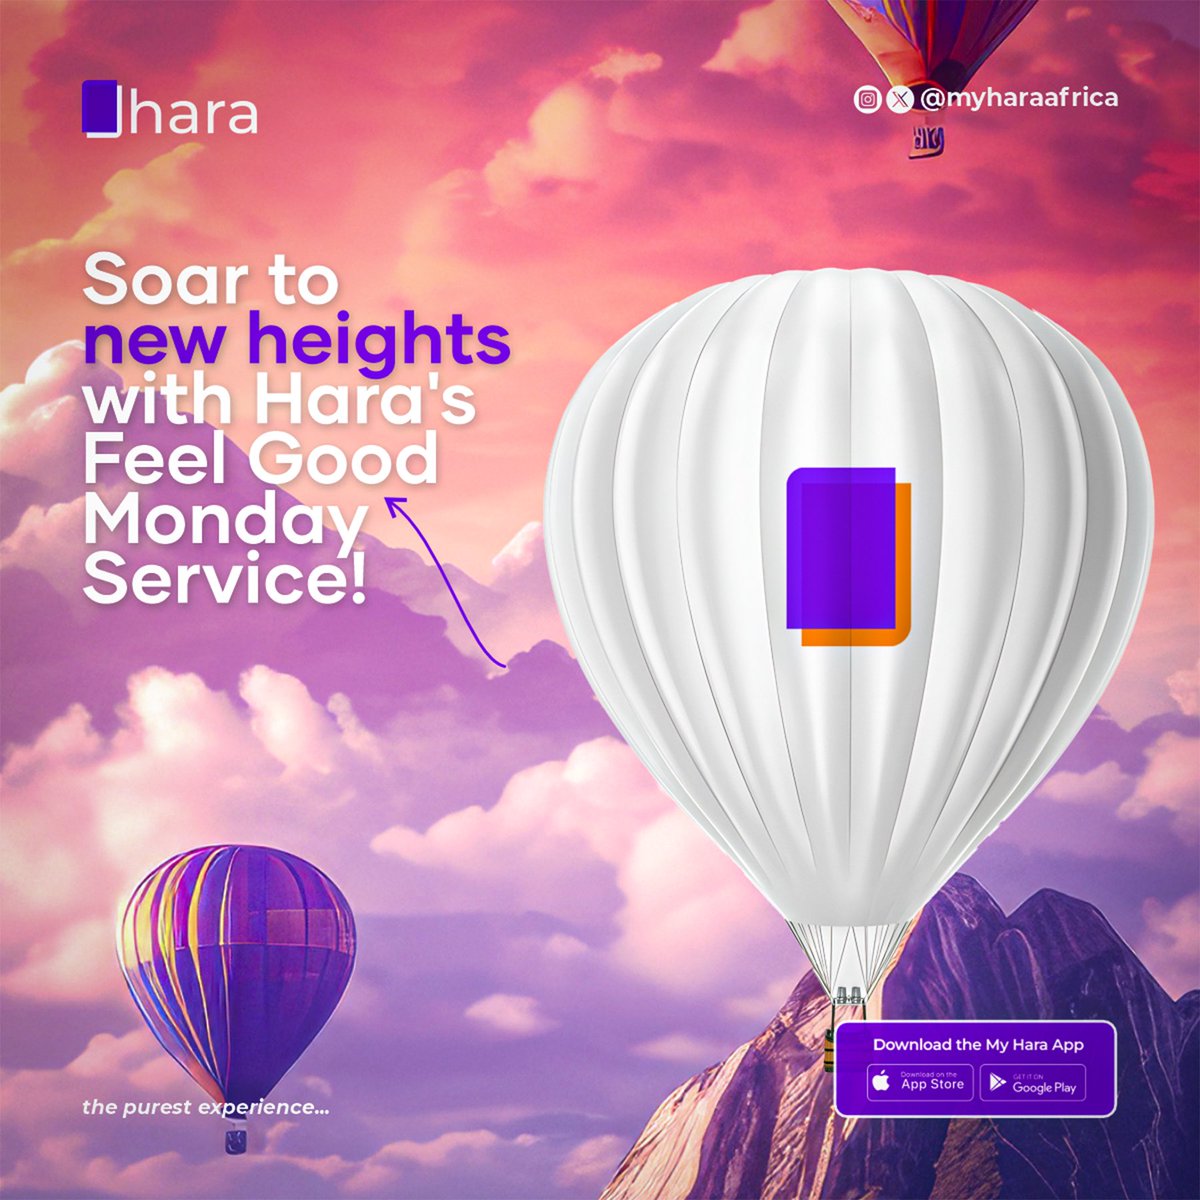 Soar to new heights with Hara's Feel Good Monday Service!

Elevate your mood and brighten your day with our seamless gift card trading platform.

Let's make Mondays magnificent together!
🎈✨

#ElevateWithHara #FeelGoodMonday #FeelHara #Hara